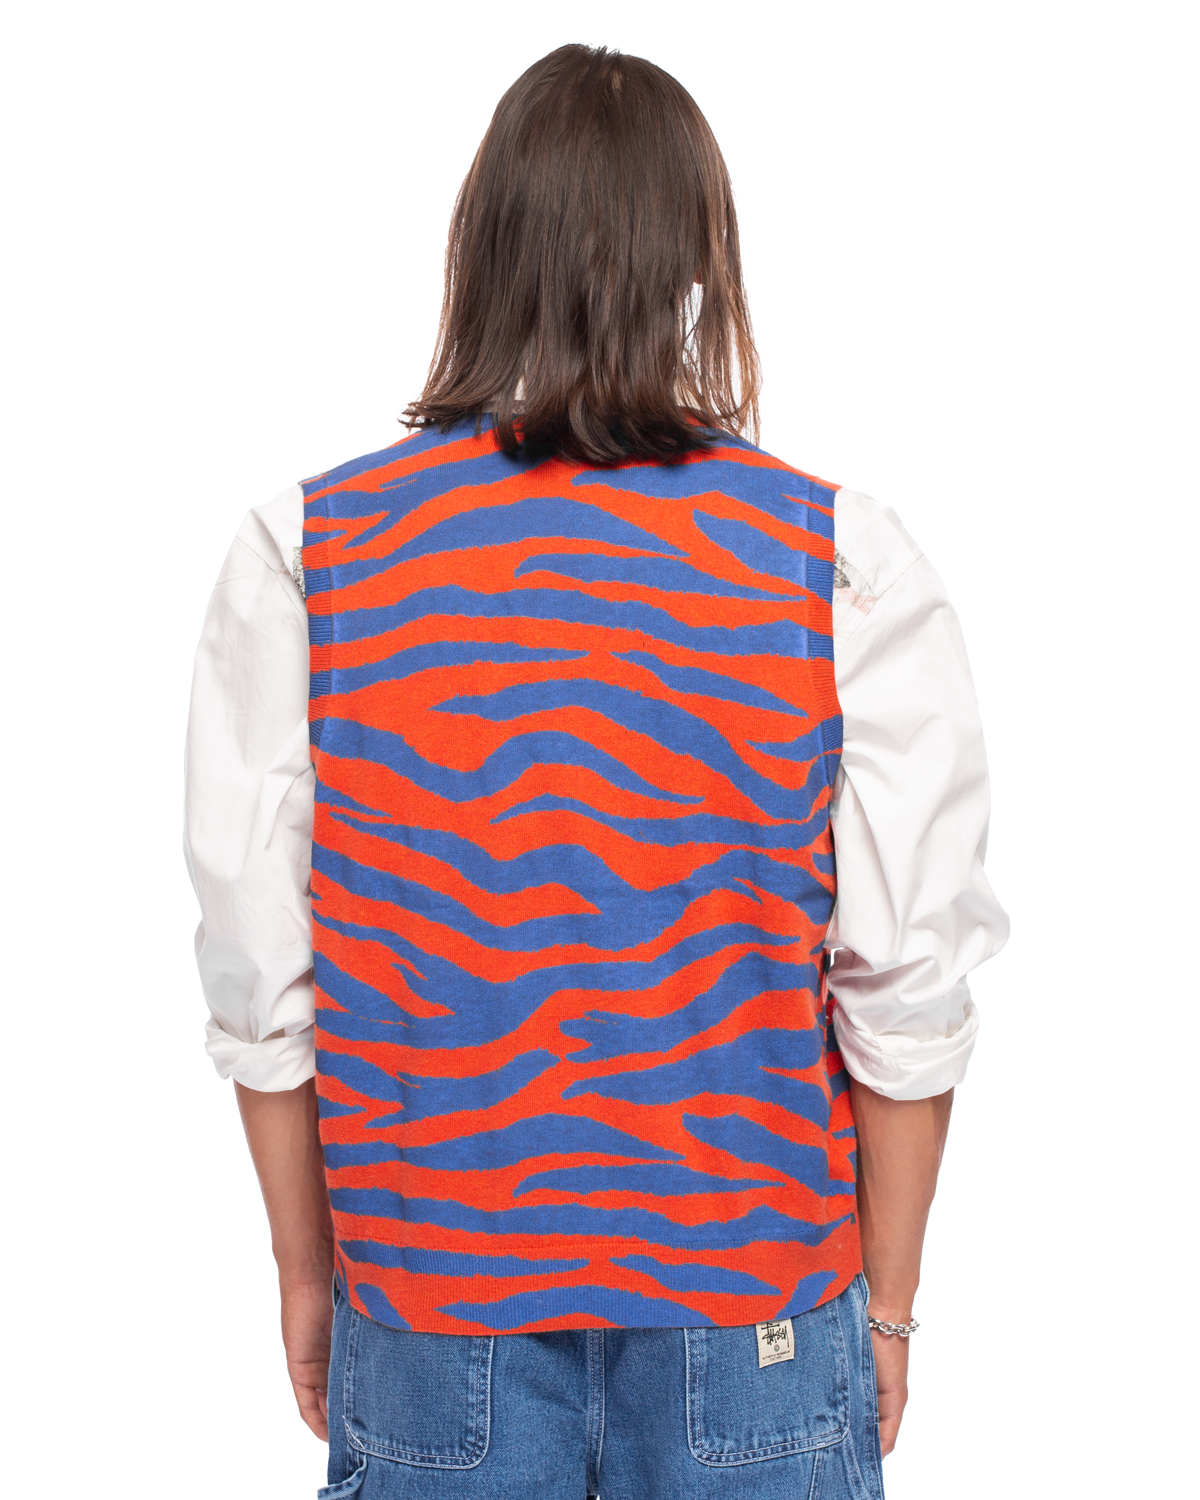 Tiger Printed Sweater Vest Red